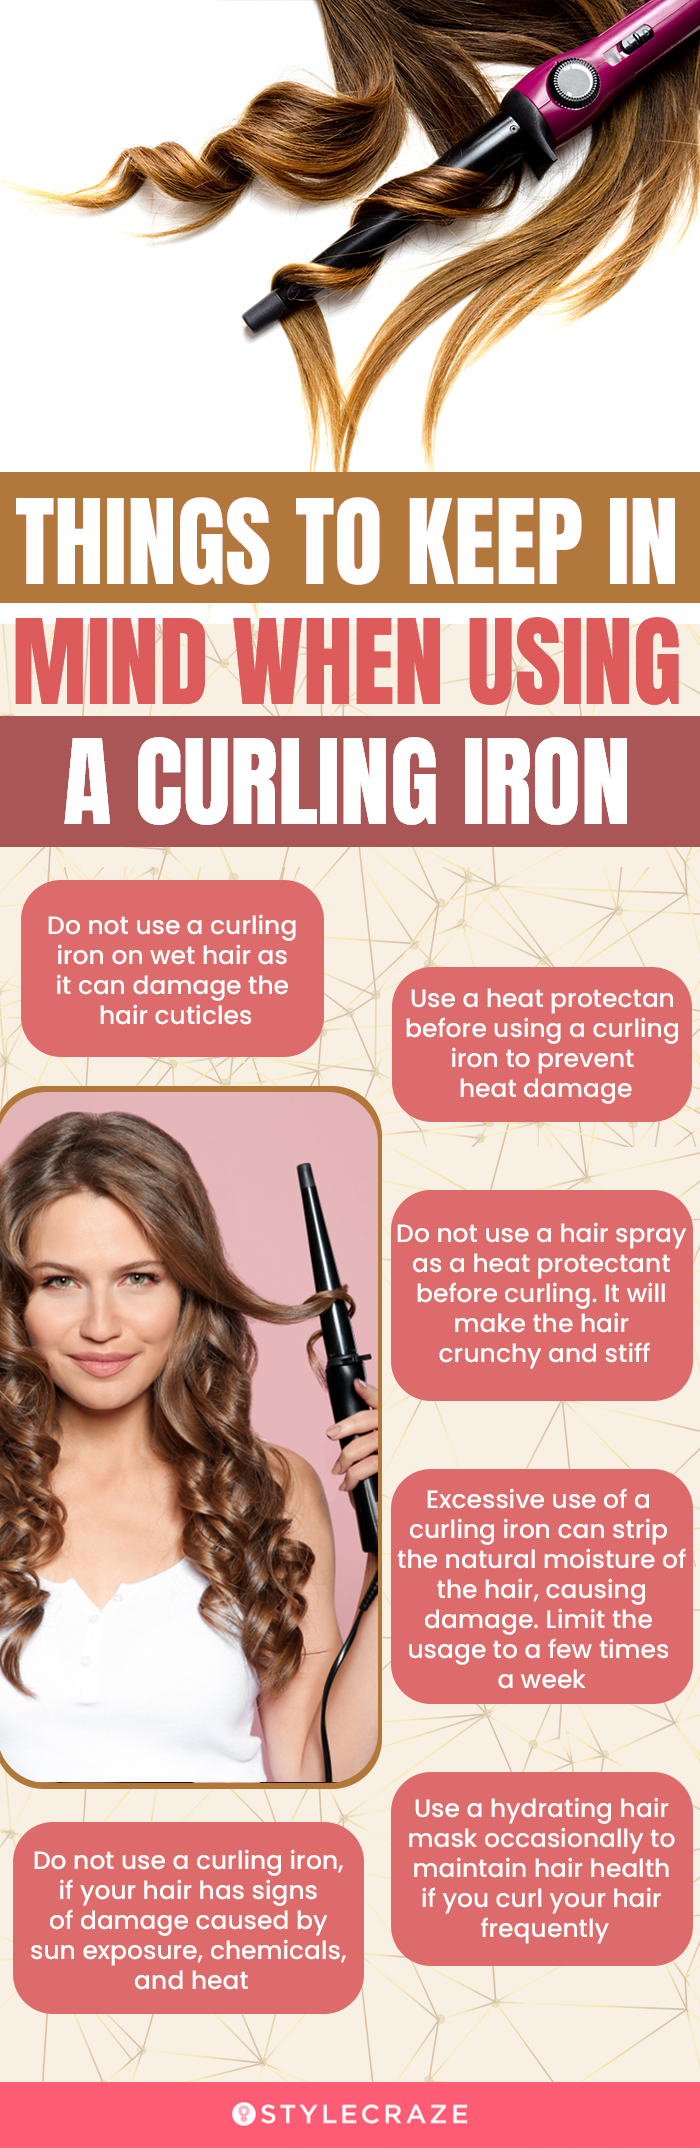 Things To Keep In Mind When Using A Curling Iron (infographic)